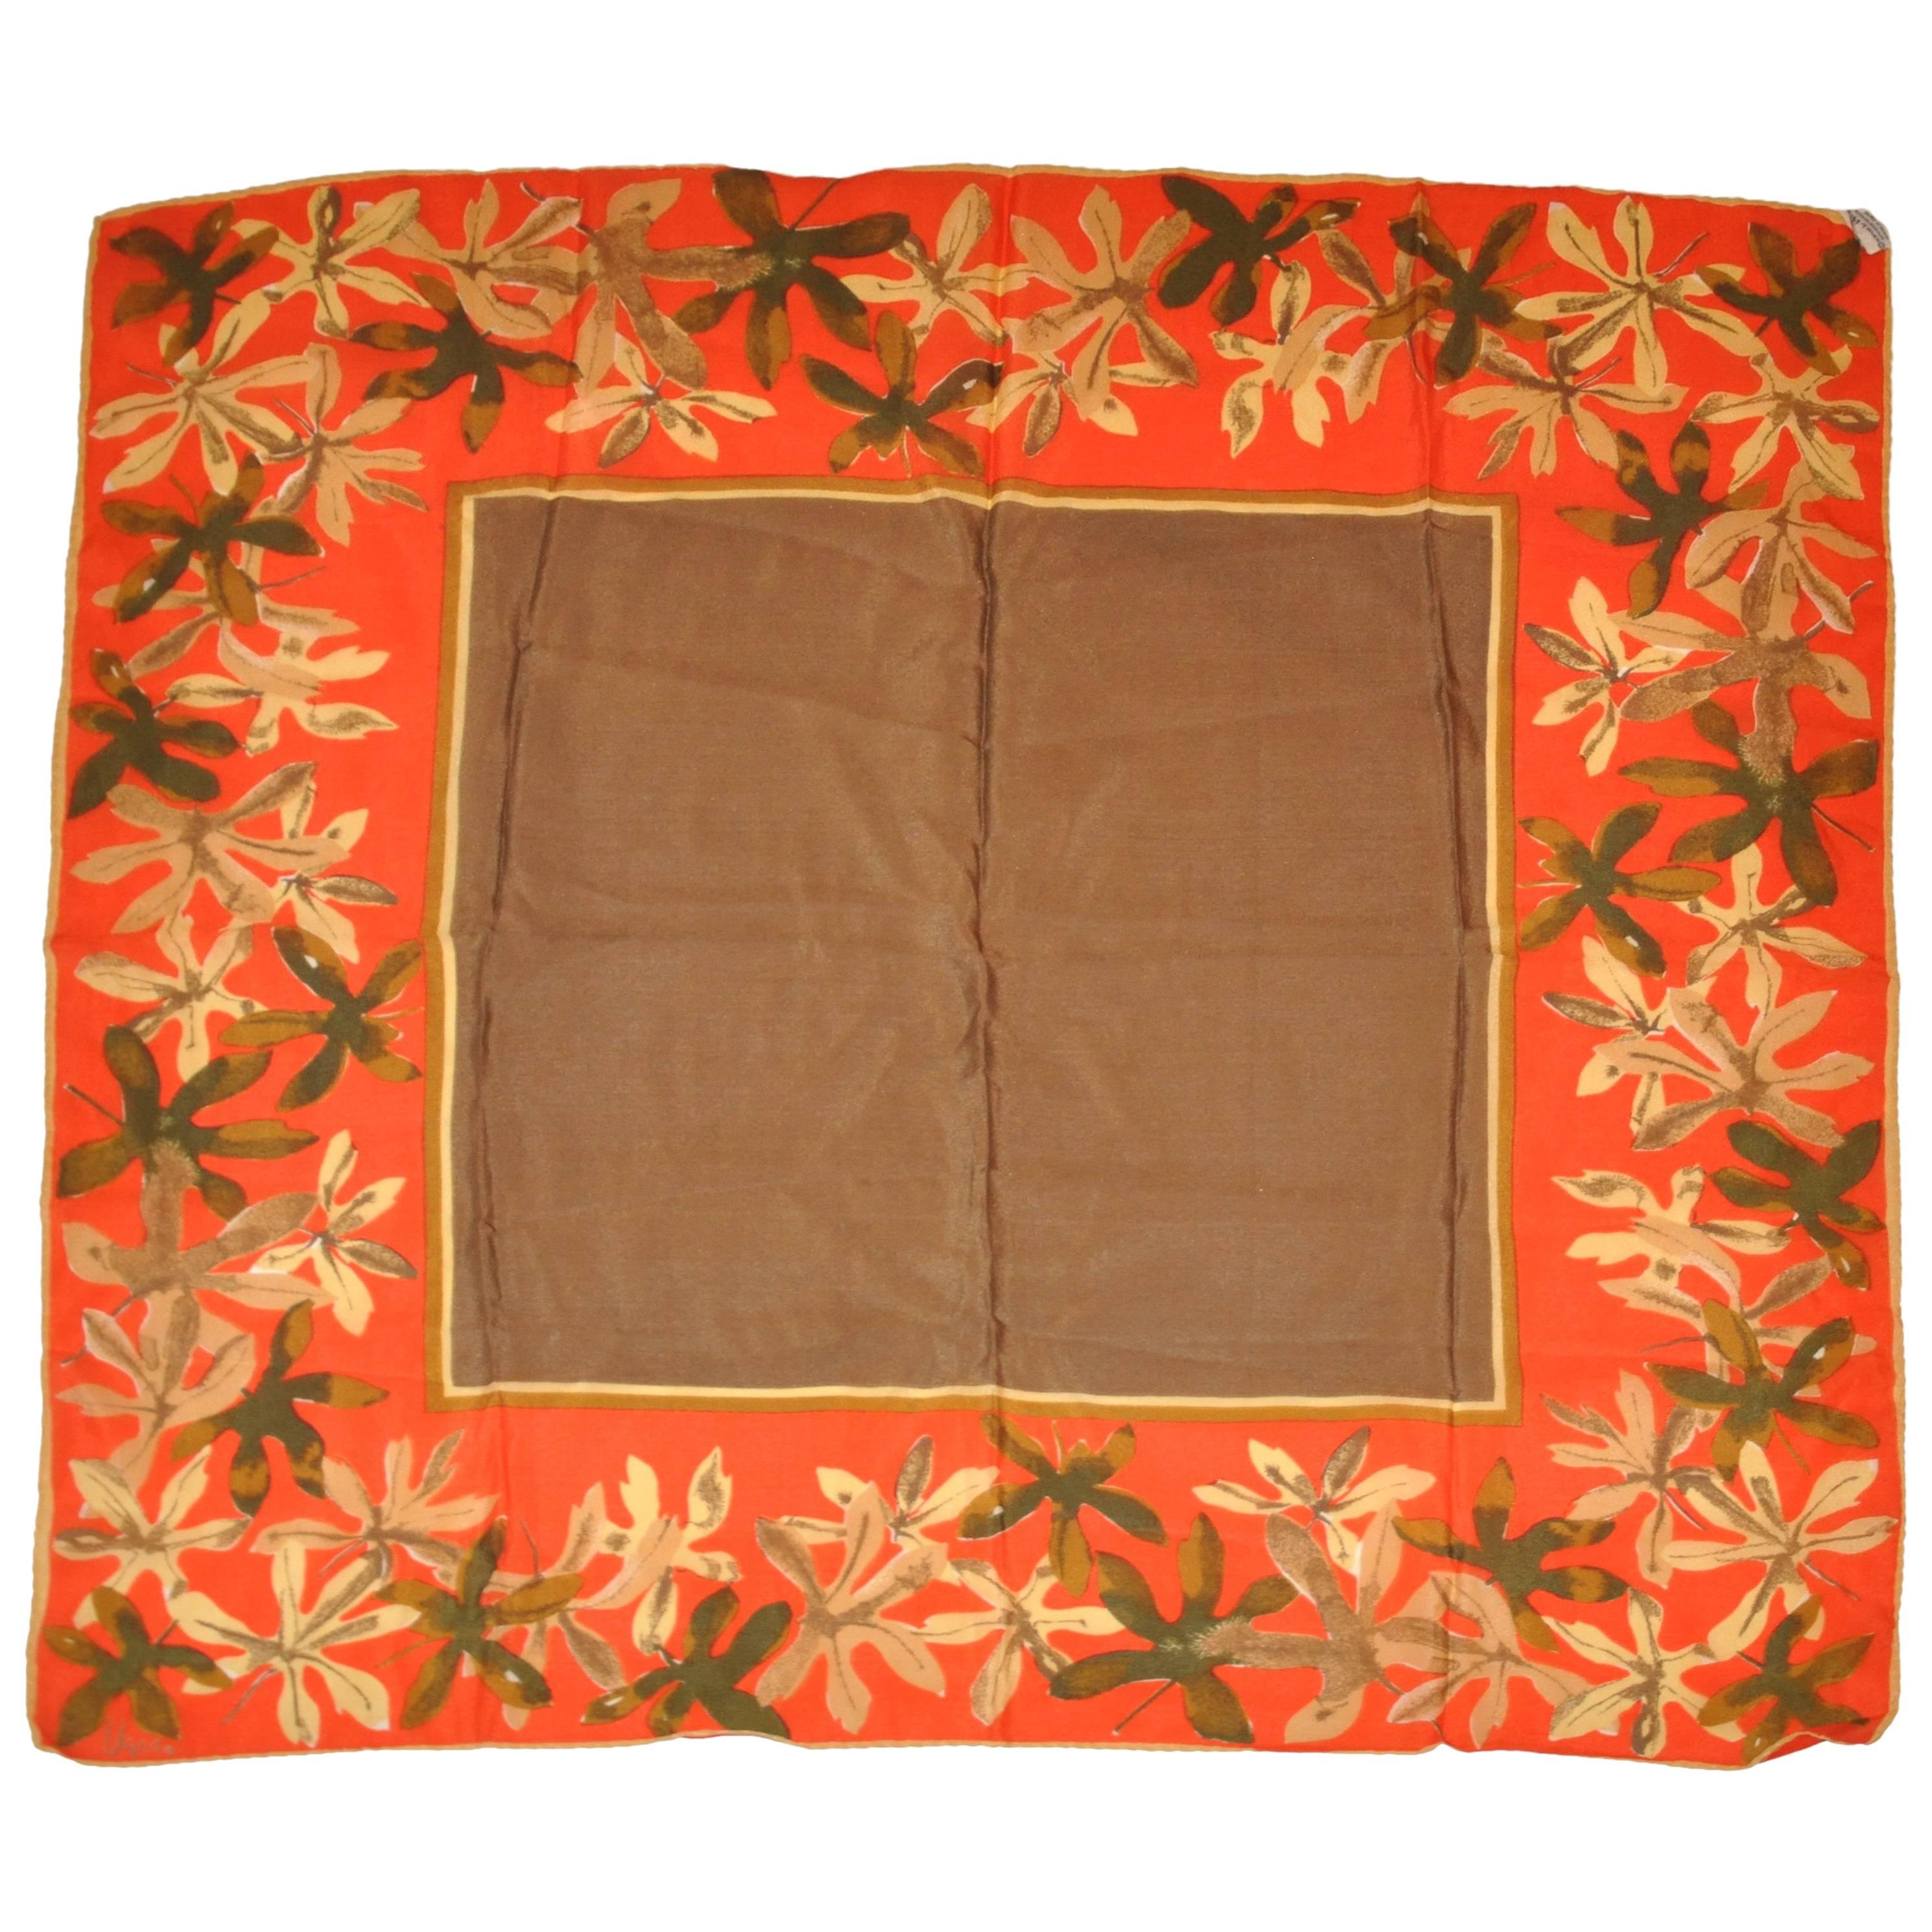 Vera Brown Center with Multi-Floral Border Silk Scarf For Sale